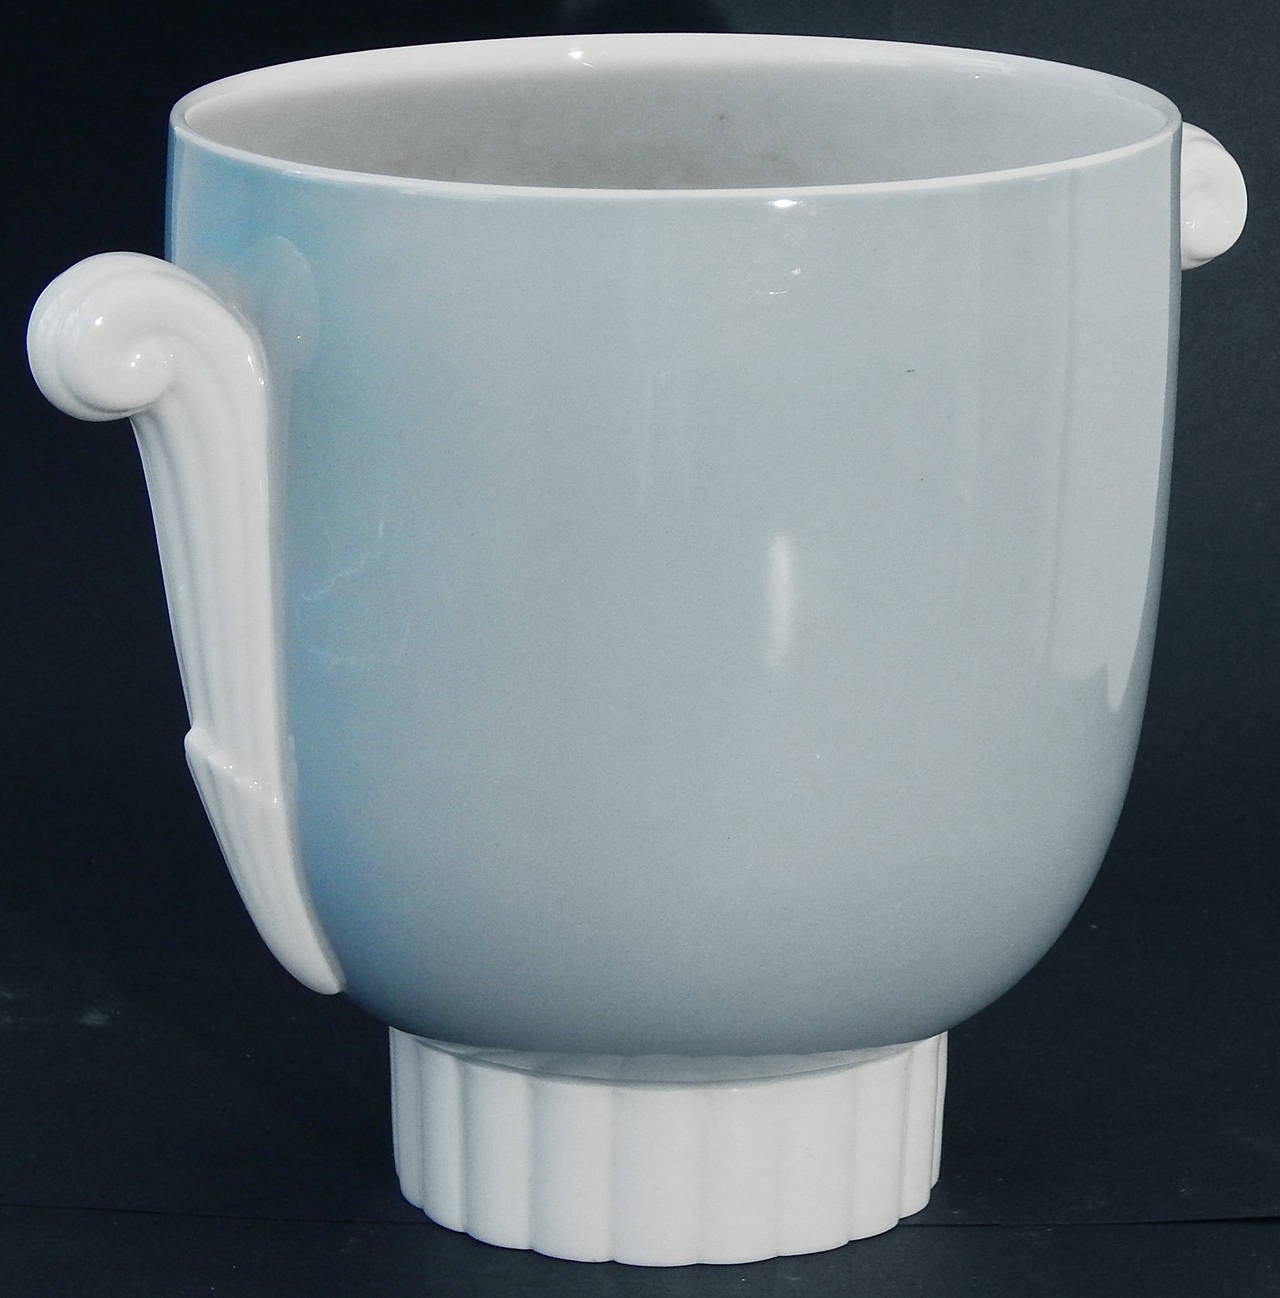 This highly rare and sophisticated Art Deco vase, gorgeously glazed in white and robin's egg blue, was made by the famed Lenox porcelain company in Trenton, New Jersey, for sale at the legendary Loring Andrews Company in Cincinnati, the city's